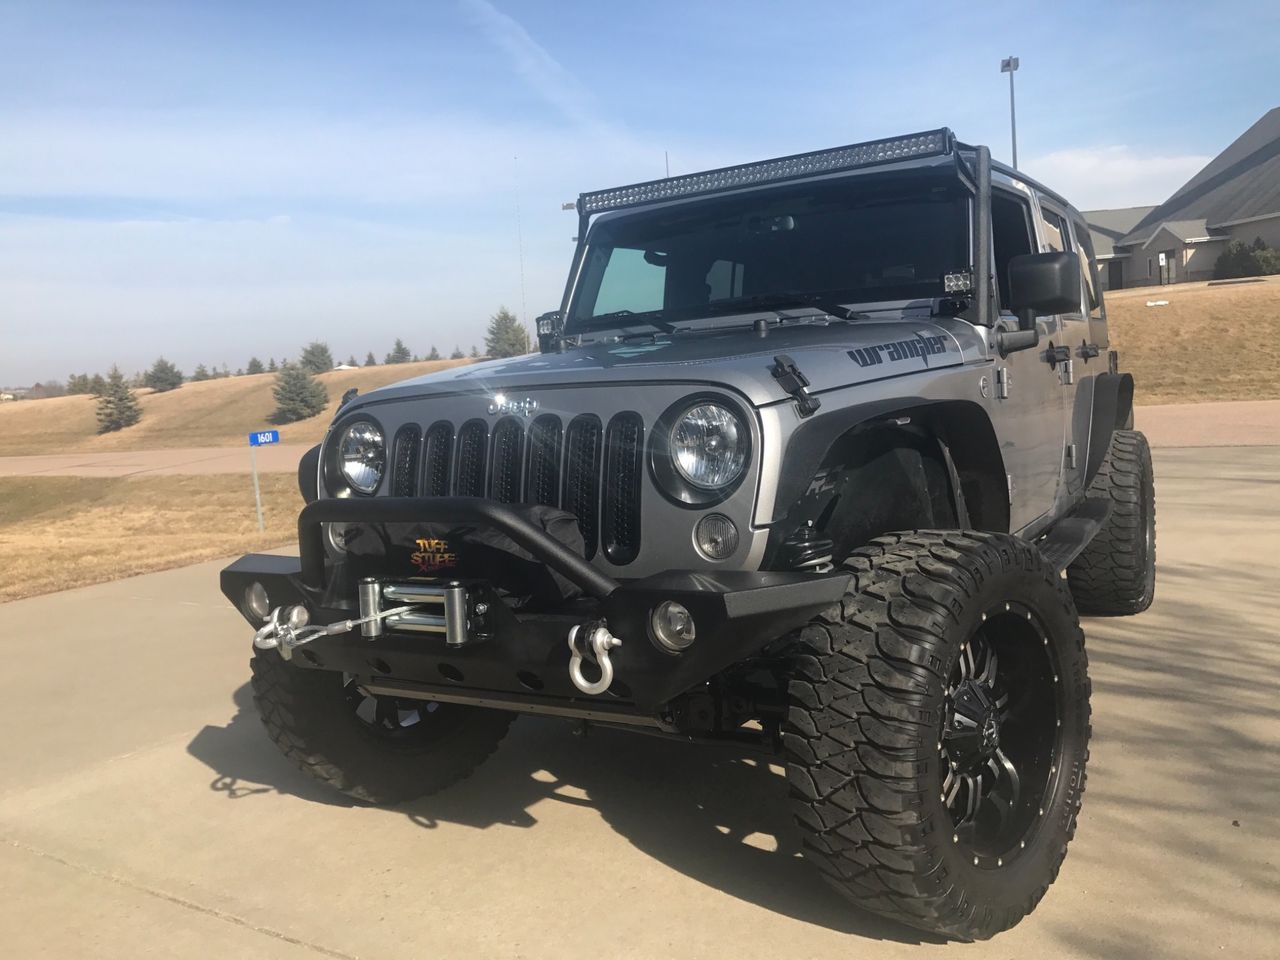 2015 Jeep Wrangler Unlimited | Sioux Falls, SD, Billet Silver Metallic Clear Coat (Silver), 4x4